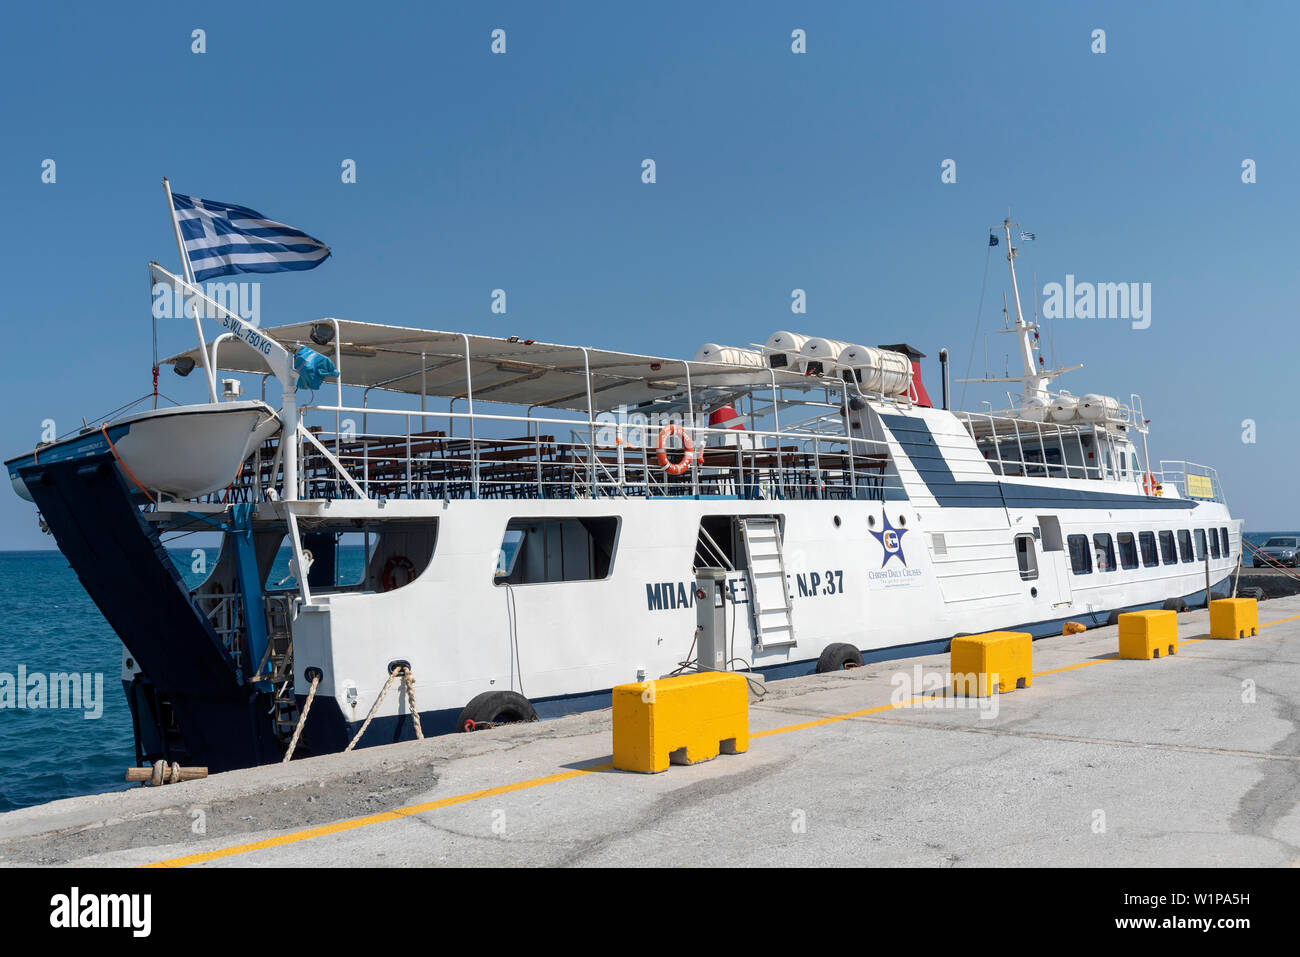 Ierapetra, Crete, Greece. June 2019. A ferry the Balos Express which sails to Chrissi Island berthed in the harbour at Ierapetra Stock Photo